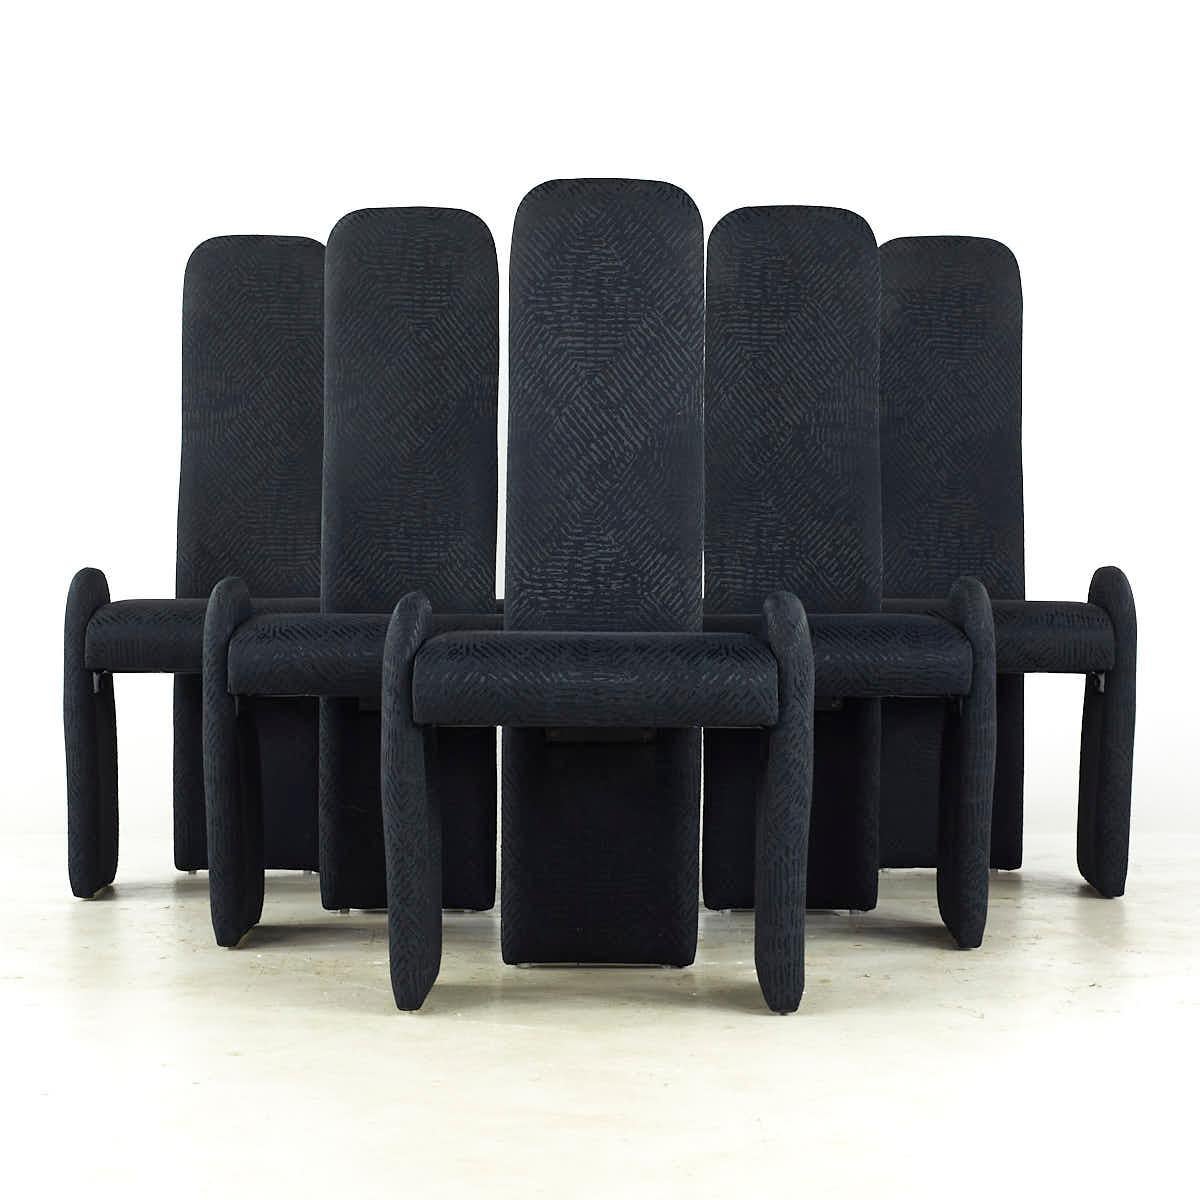 Pierre Cardin Mid Century Armless Dining Chairs – Set of 6

Each chair measures: 21.75 wide x 22 deep x 43 inches high, with a seat height/chair clearance of 18.75 inches

All pieces of furniture can be had in what we call restored vintage